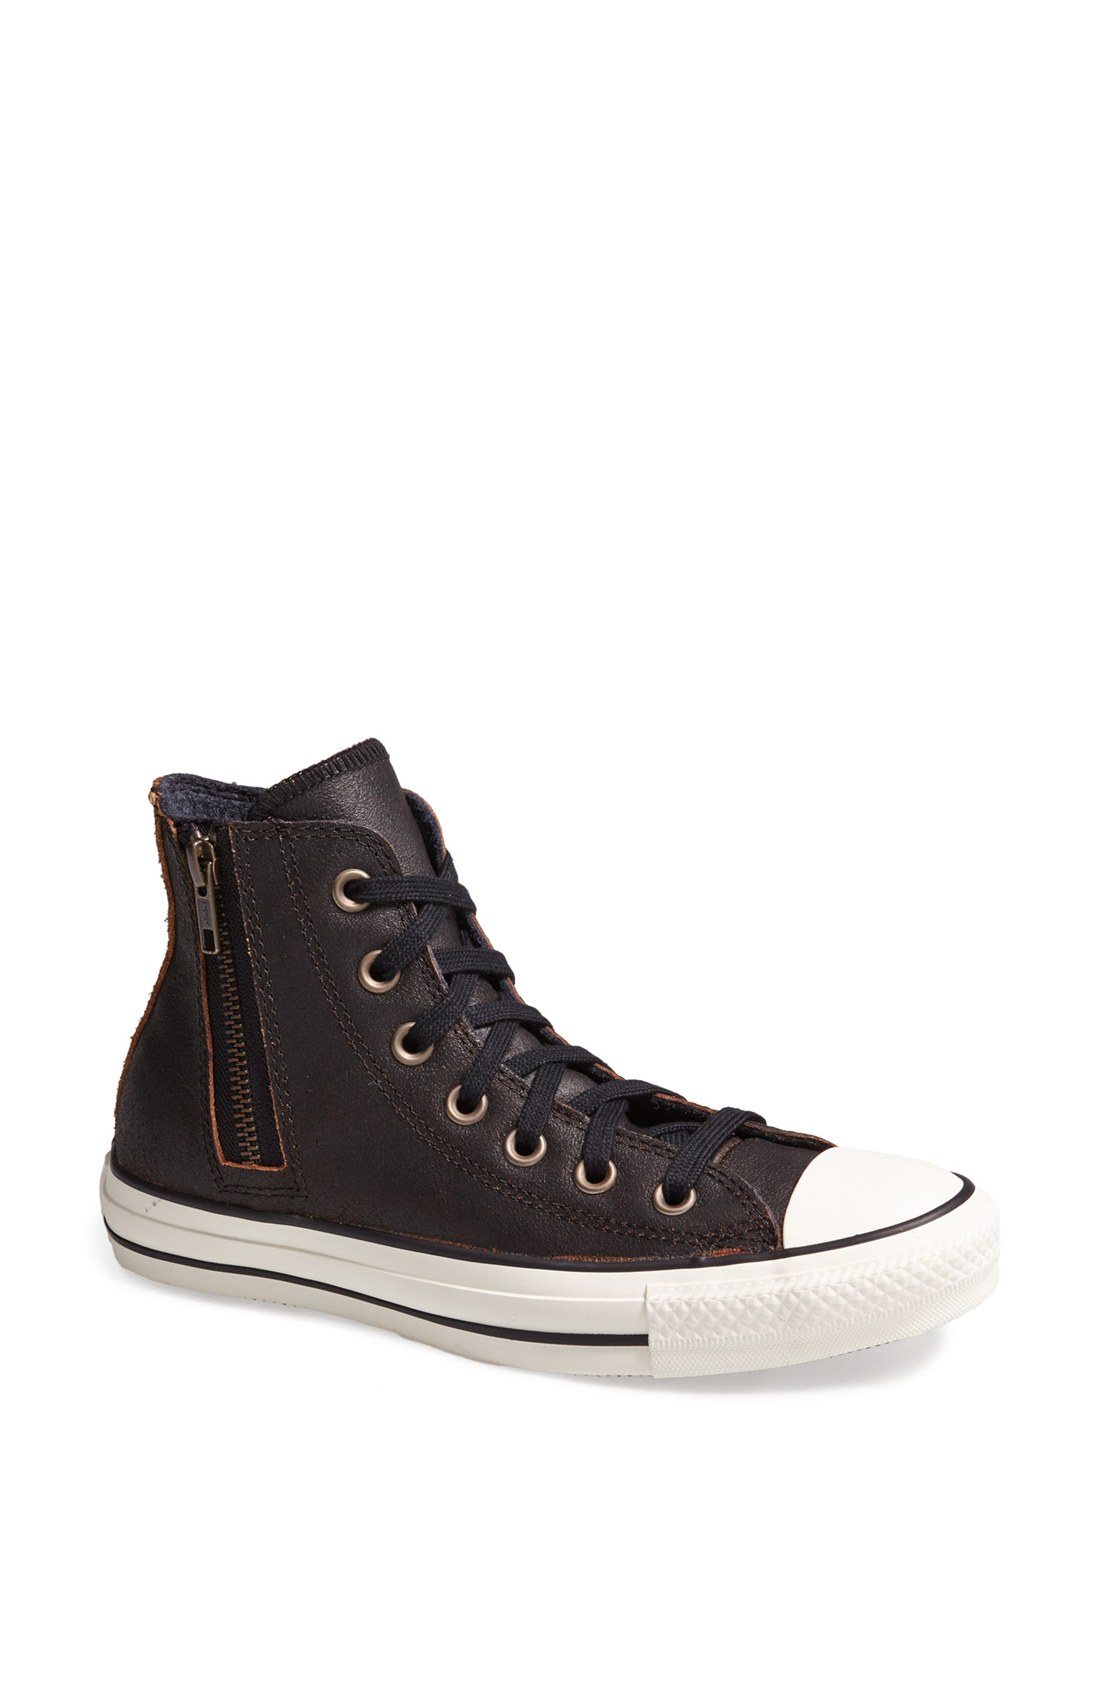 Converse Chuck Taylor Aviator Side Zip Leather High Top Sneaker in ...